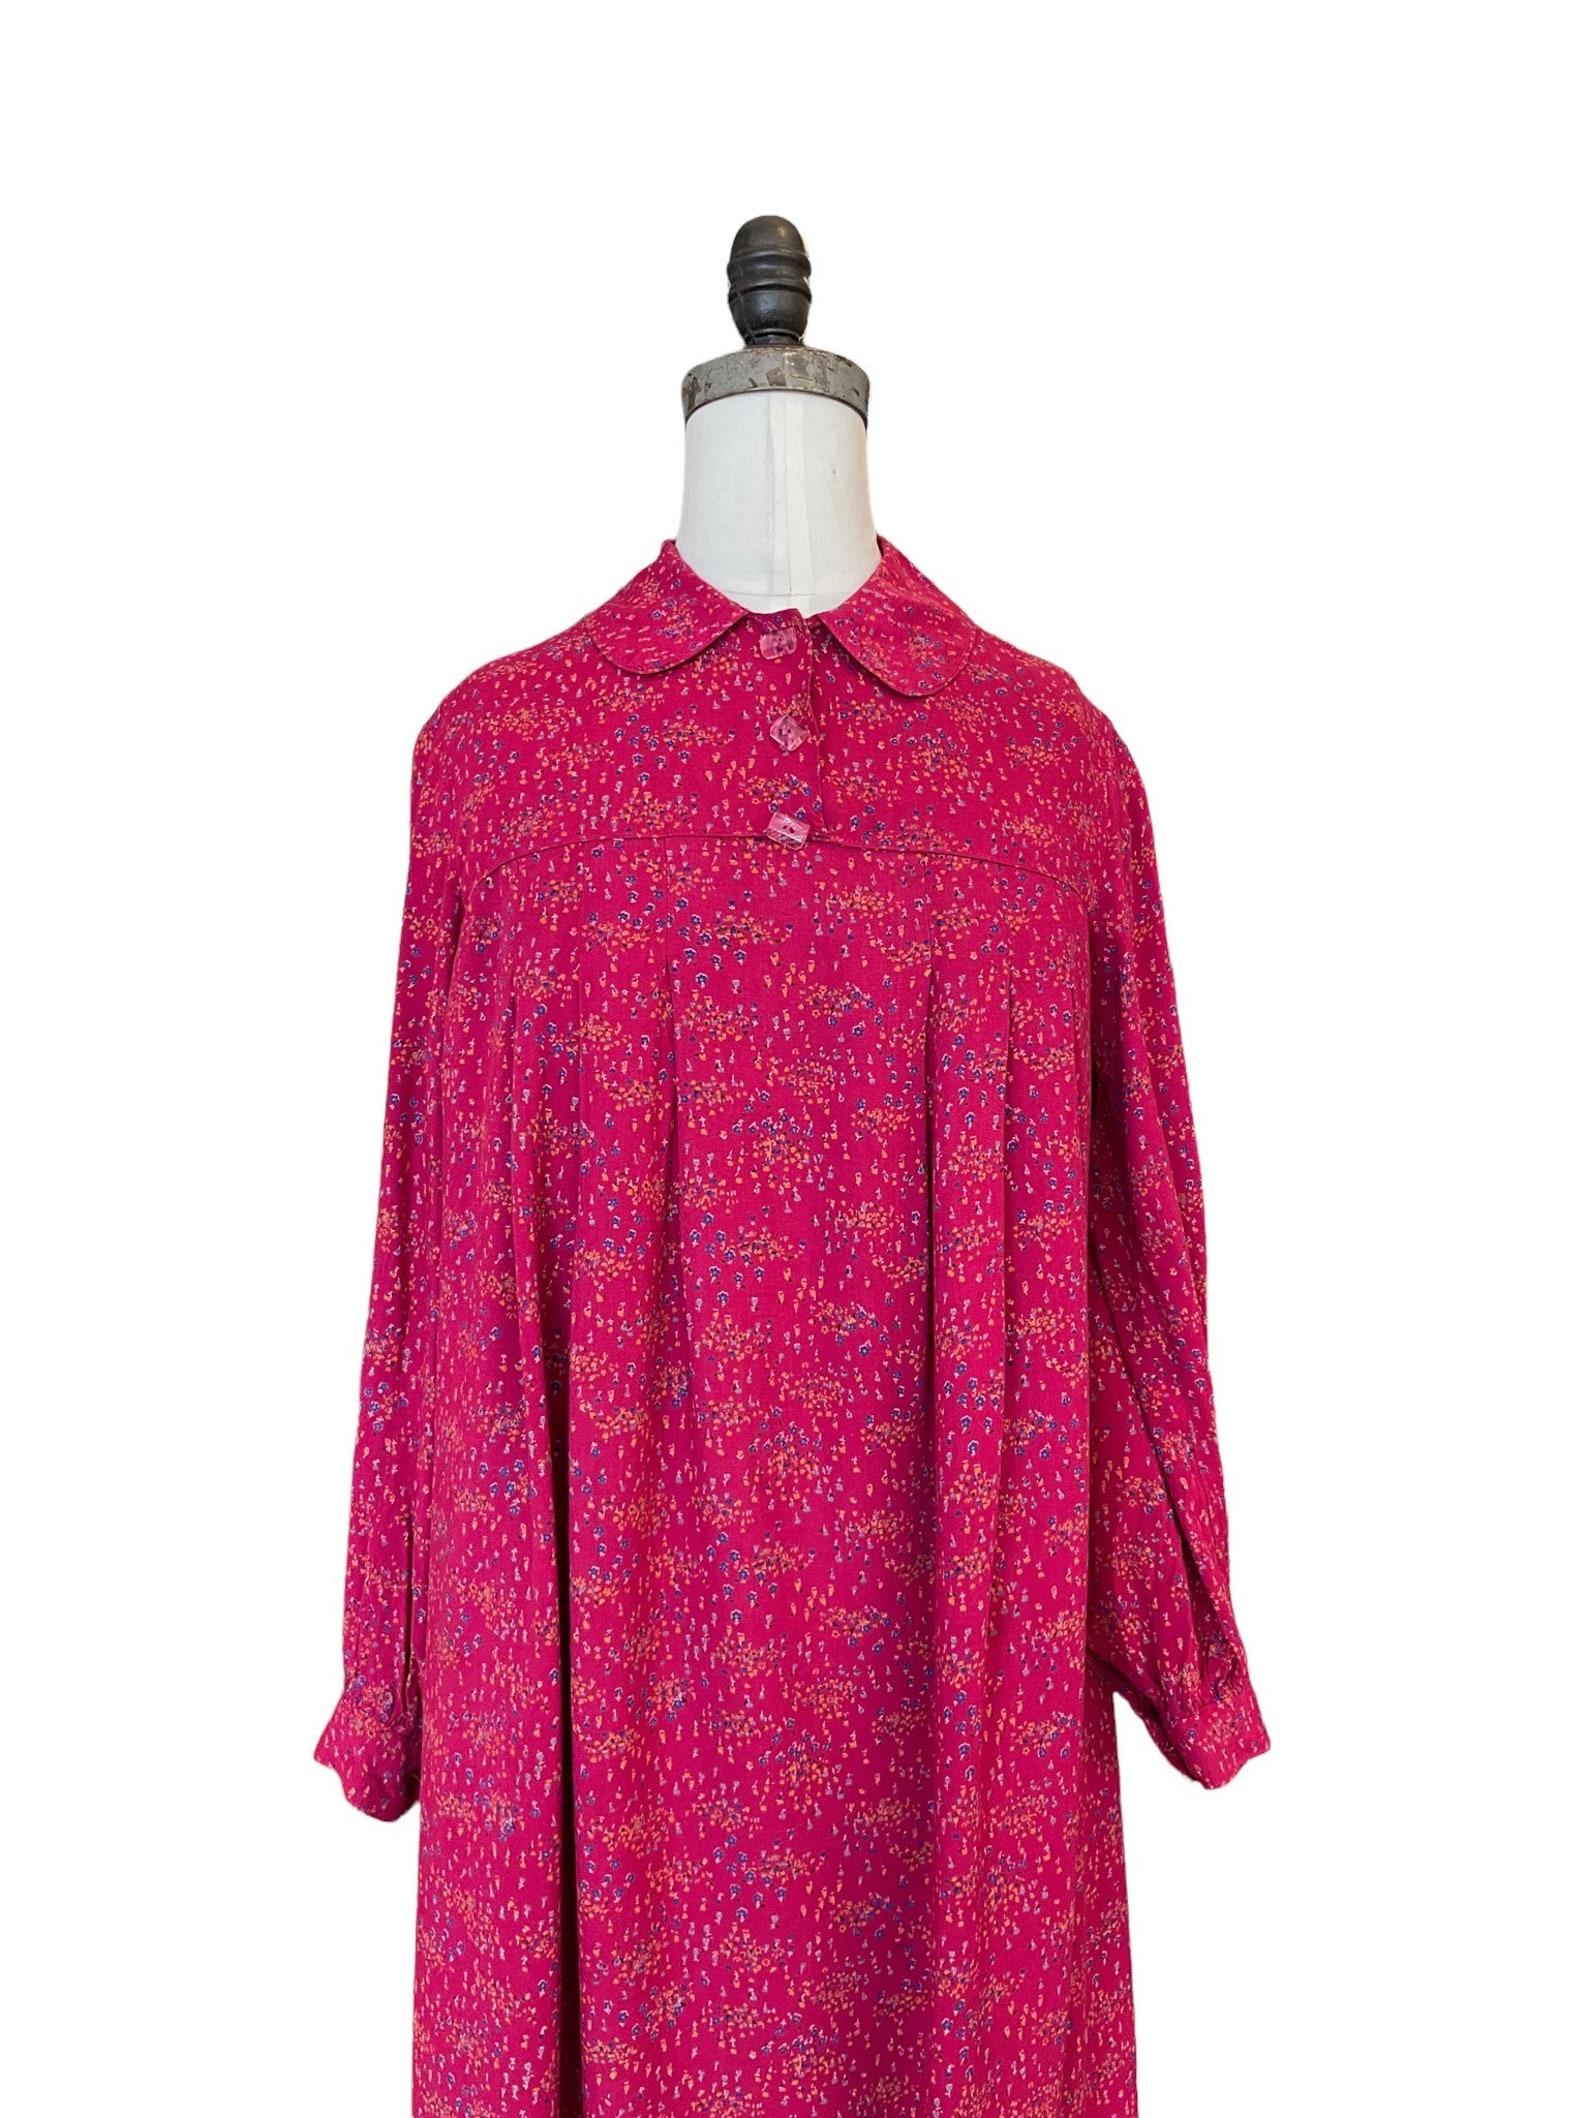 Raspberry Pink Floral Trapeze Dress, Circa 1970s For Sale 2